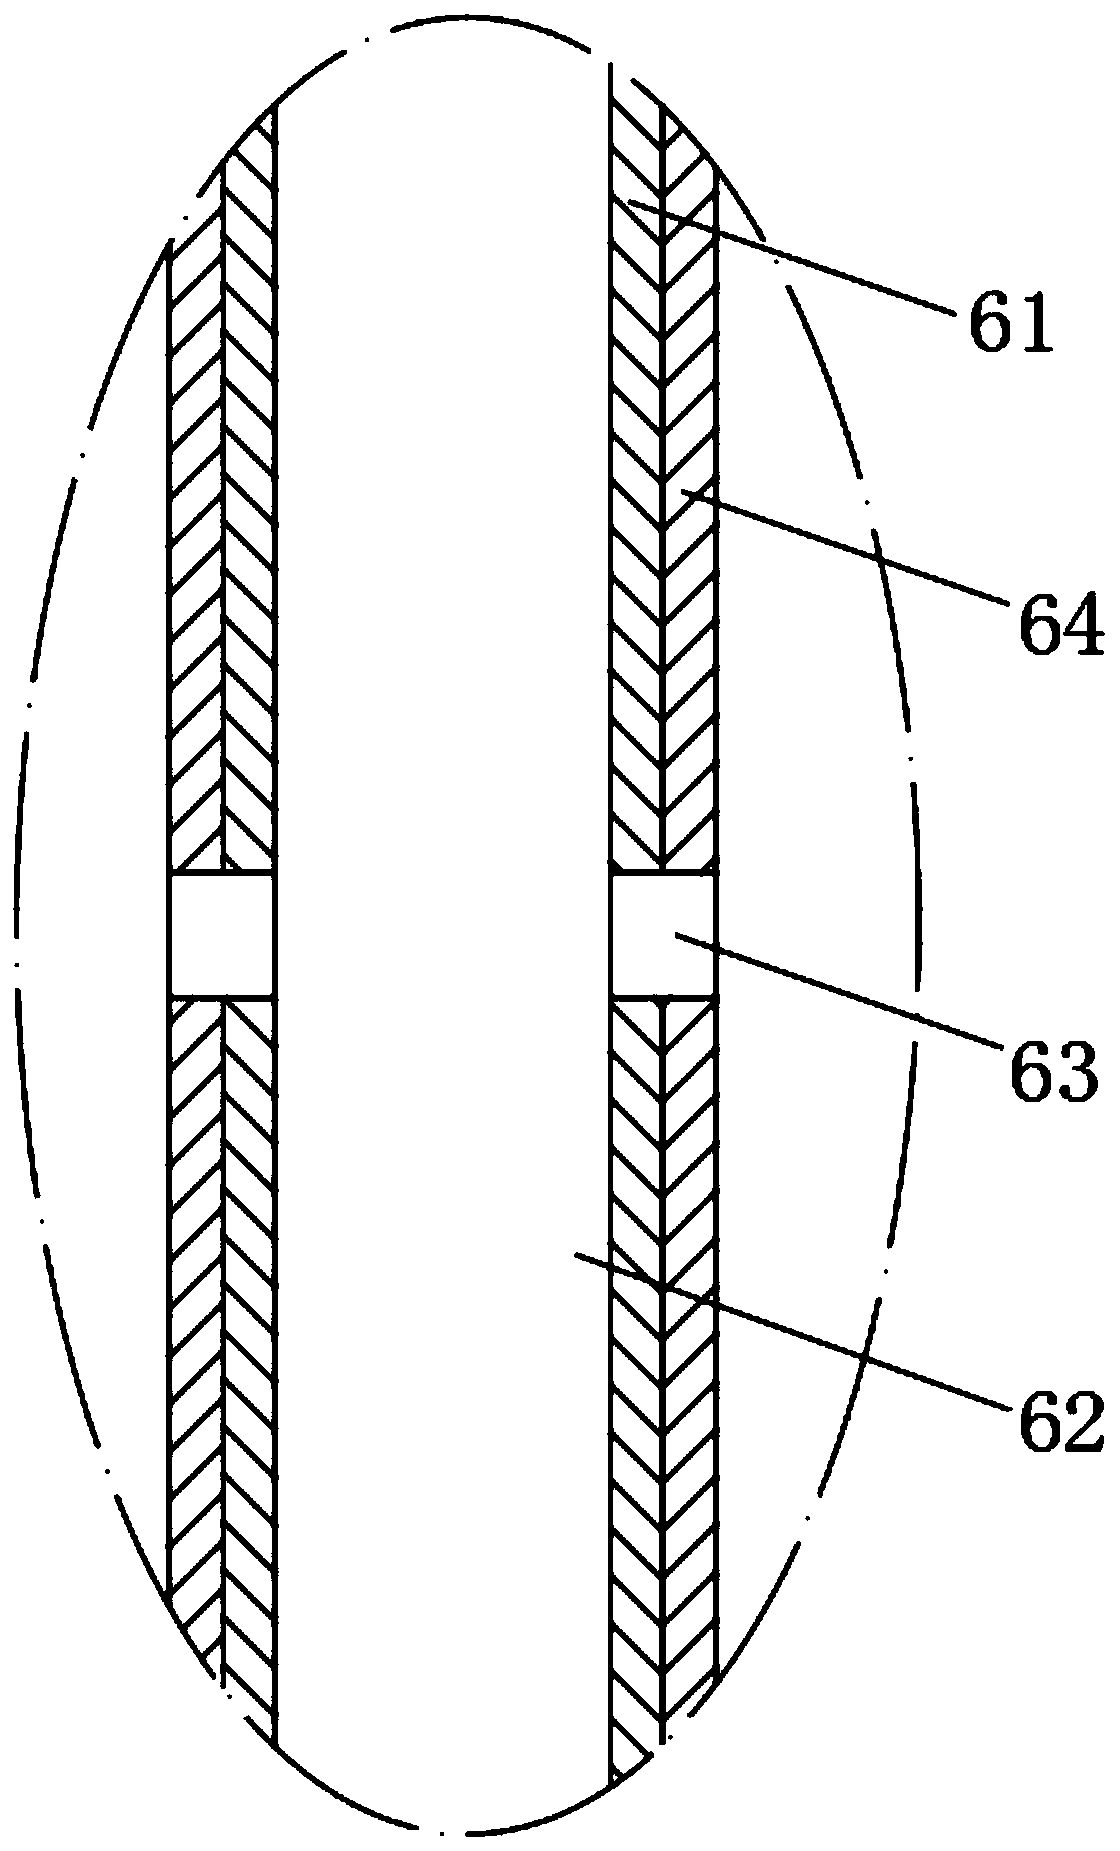 Tension-compression coupled pressure-absorbing energy-absorbing grouting bolt for large deformation of surrounding rock and its working method